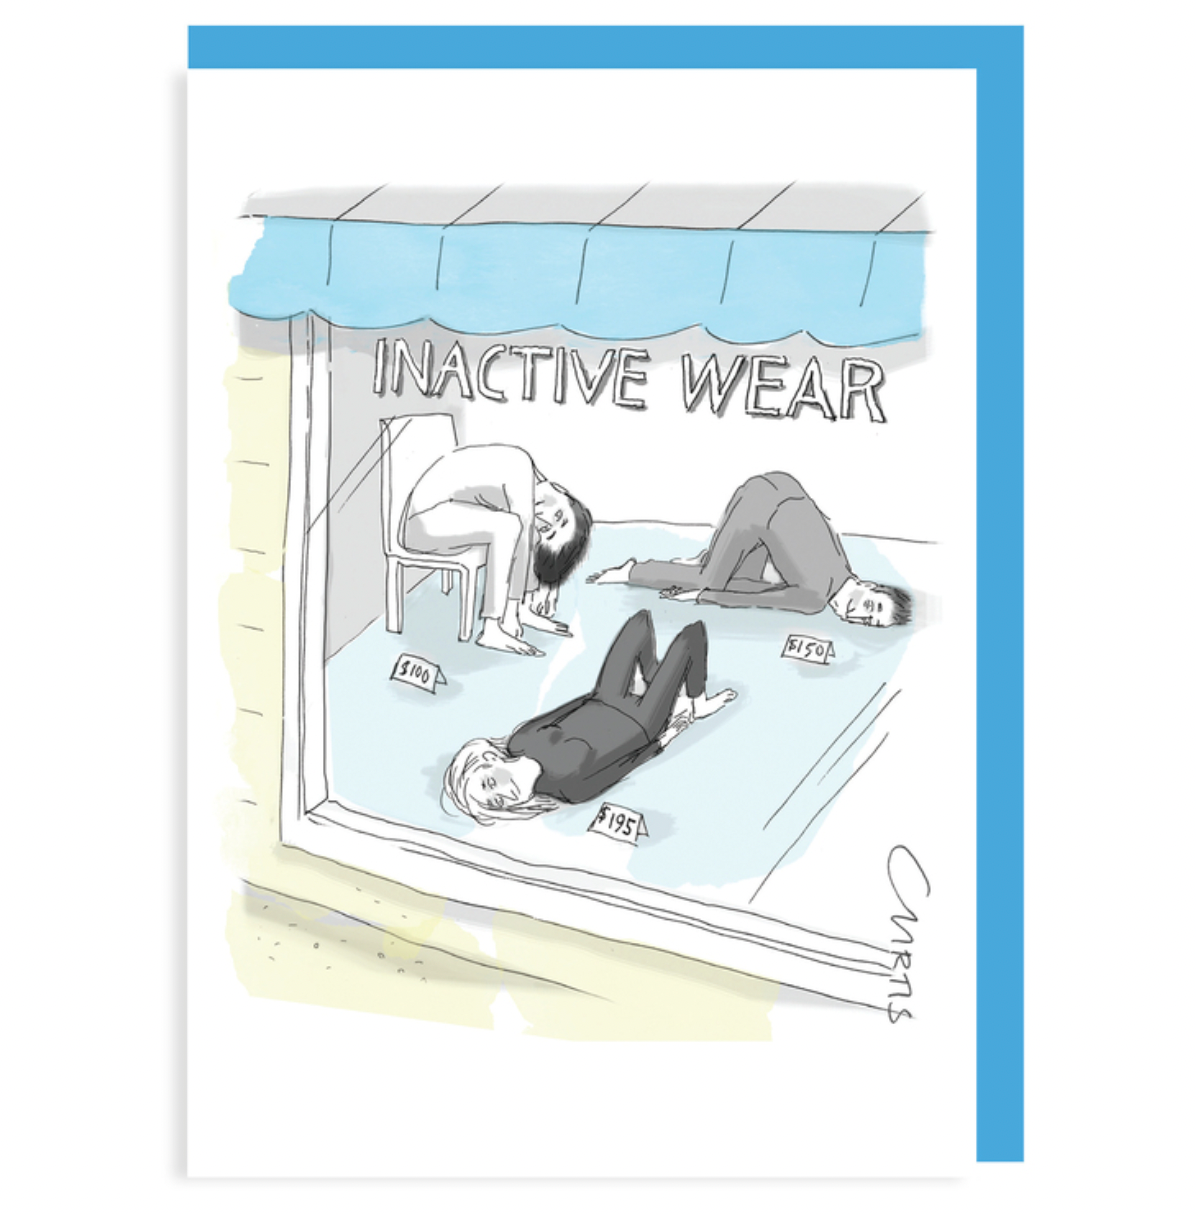 New Yorker Note Card -  Inactive Wear